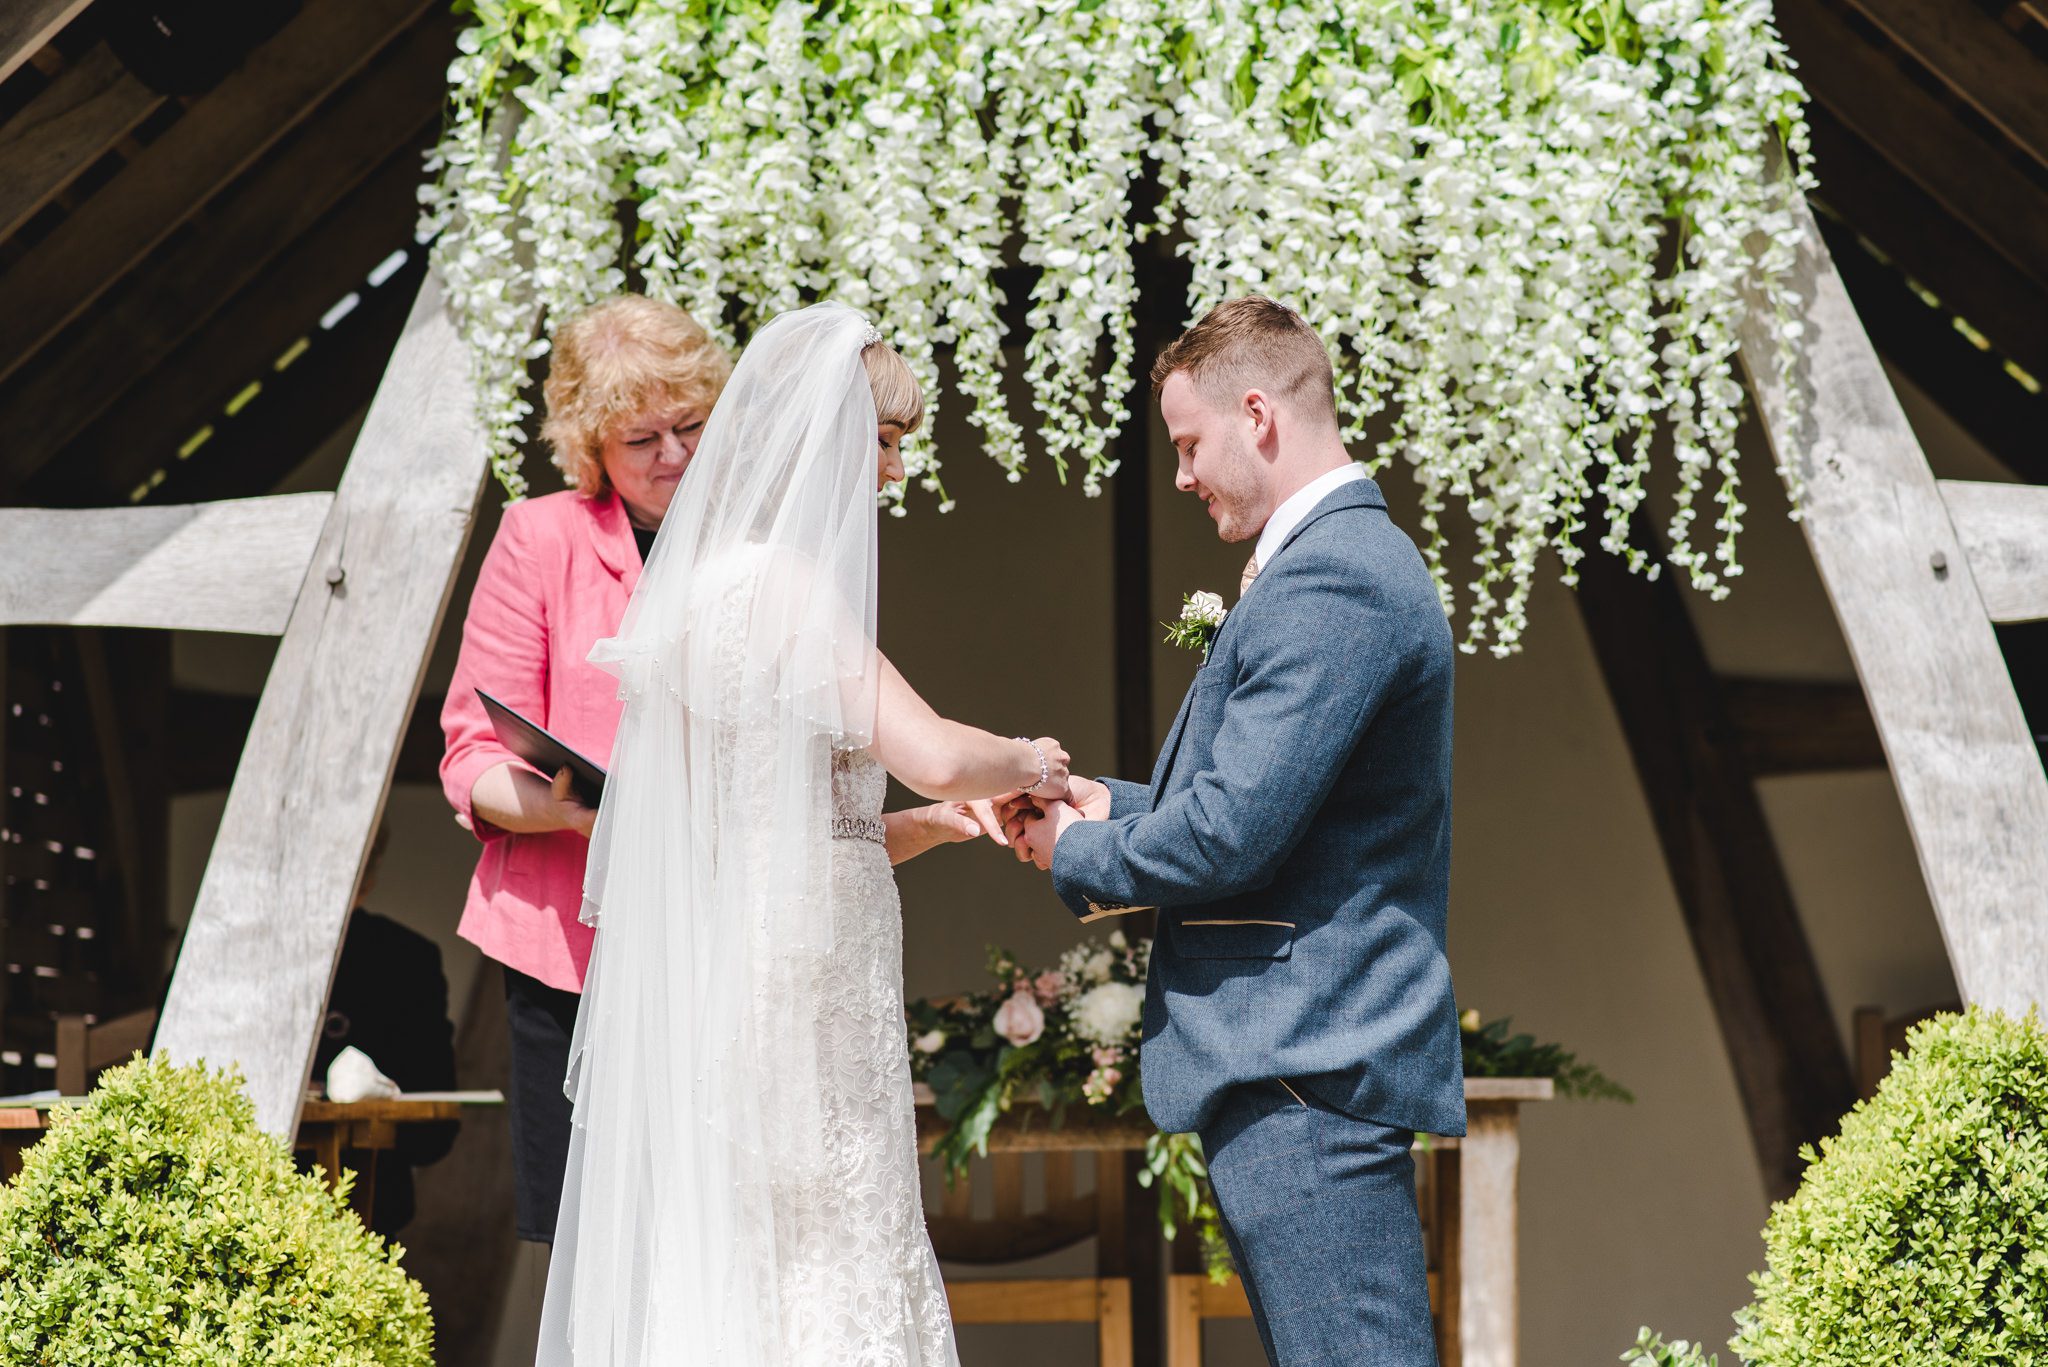 Exchanging rings outside the Linhay at Kingscote Barn